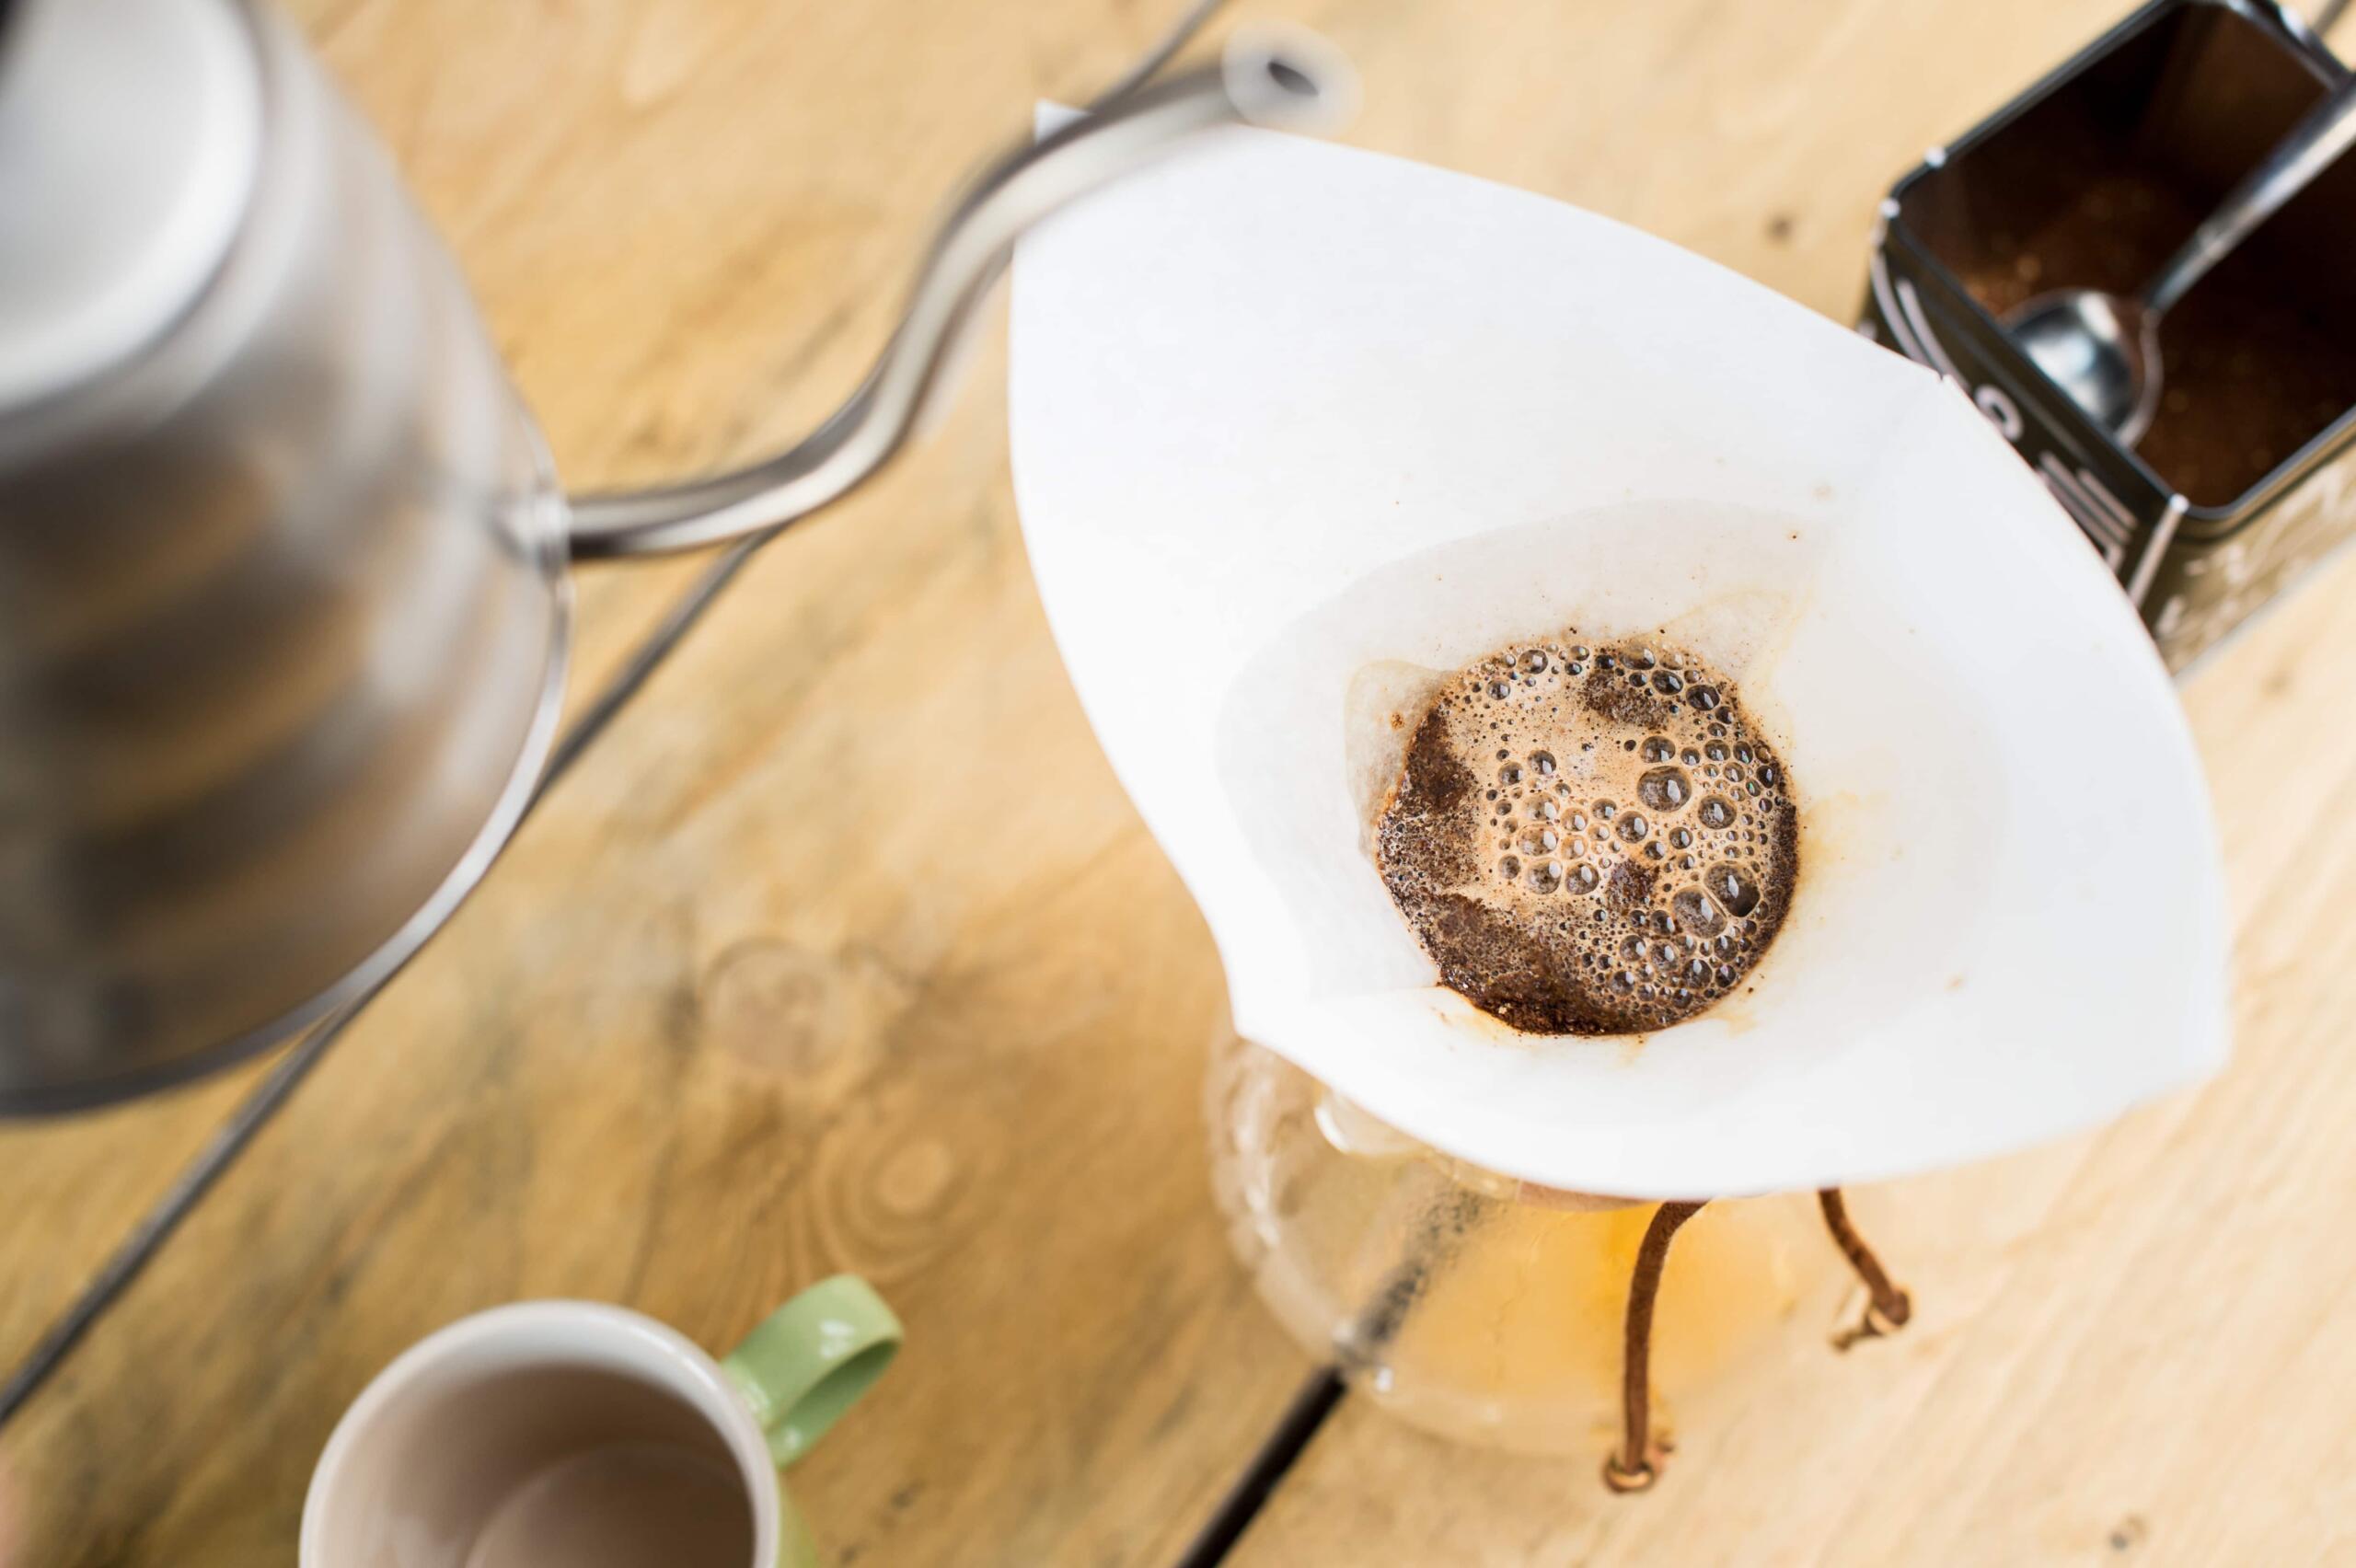 A Chemex coffee maker with coffee blooming